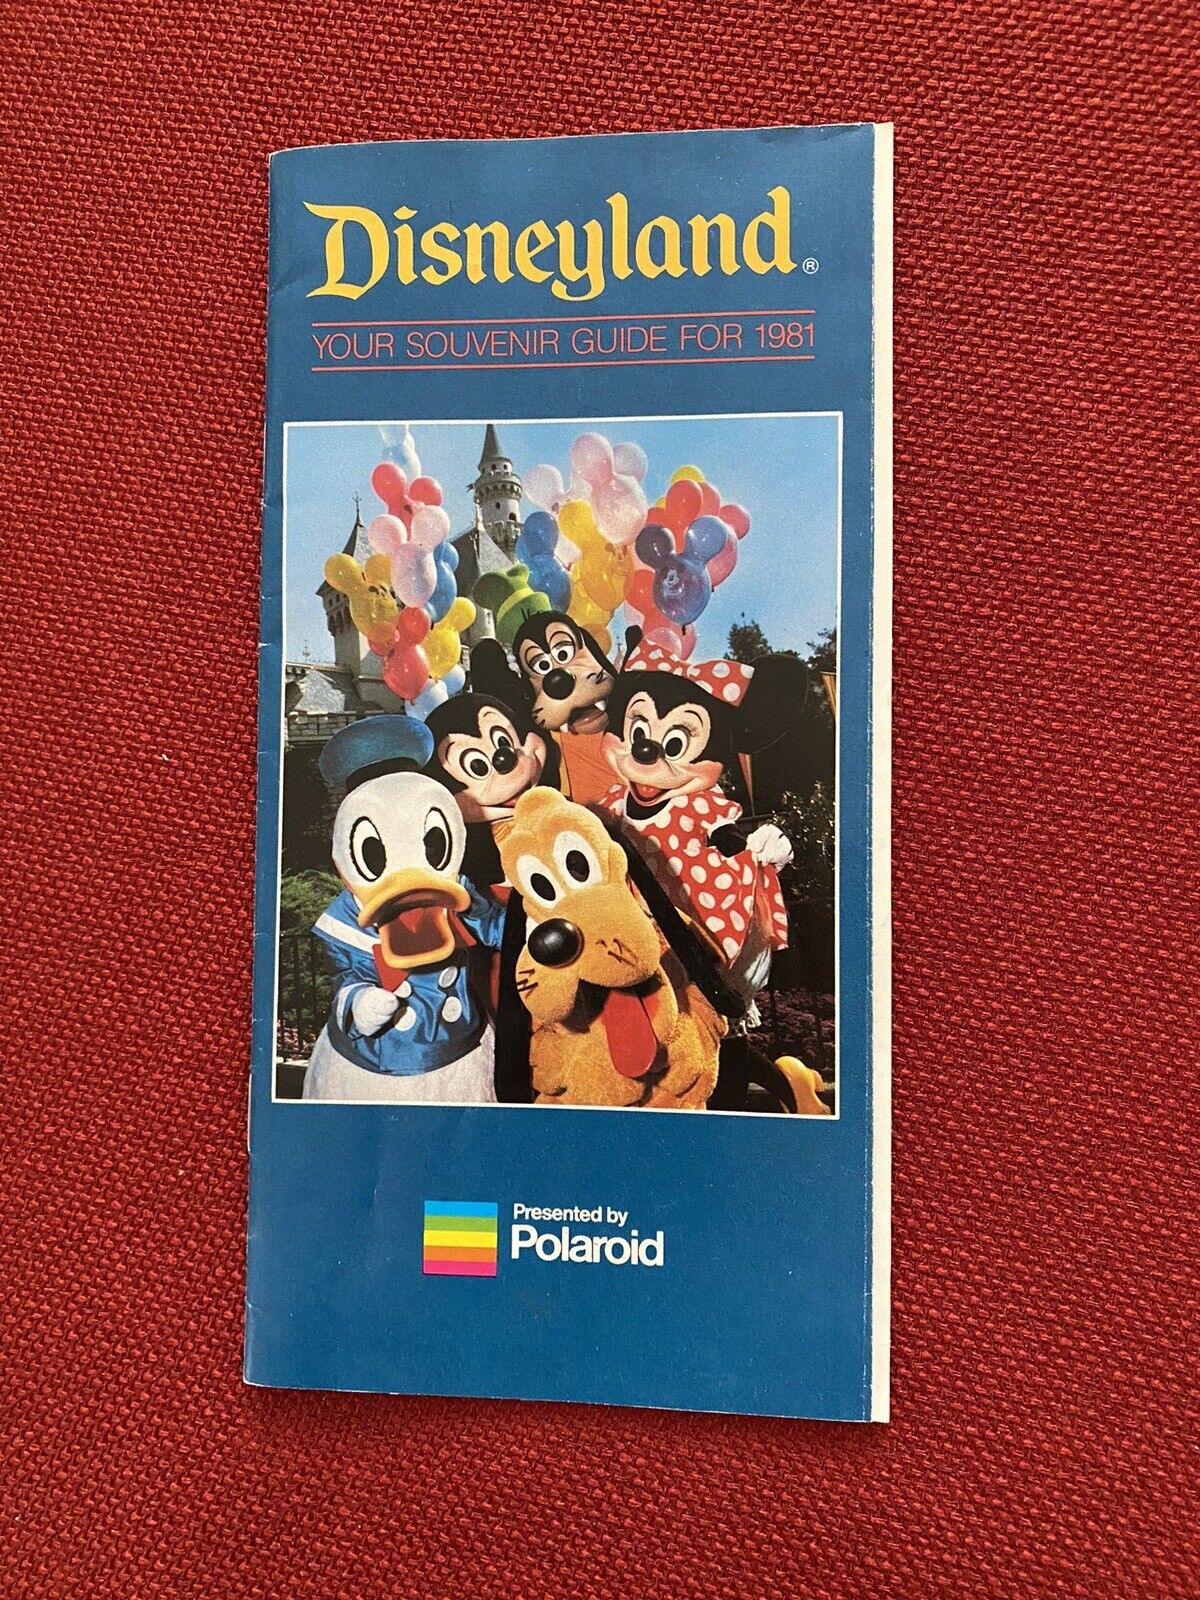 Disneyland Your Souvenir Guide for 1981 by Polaroid 